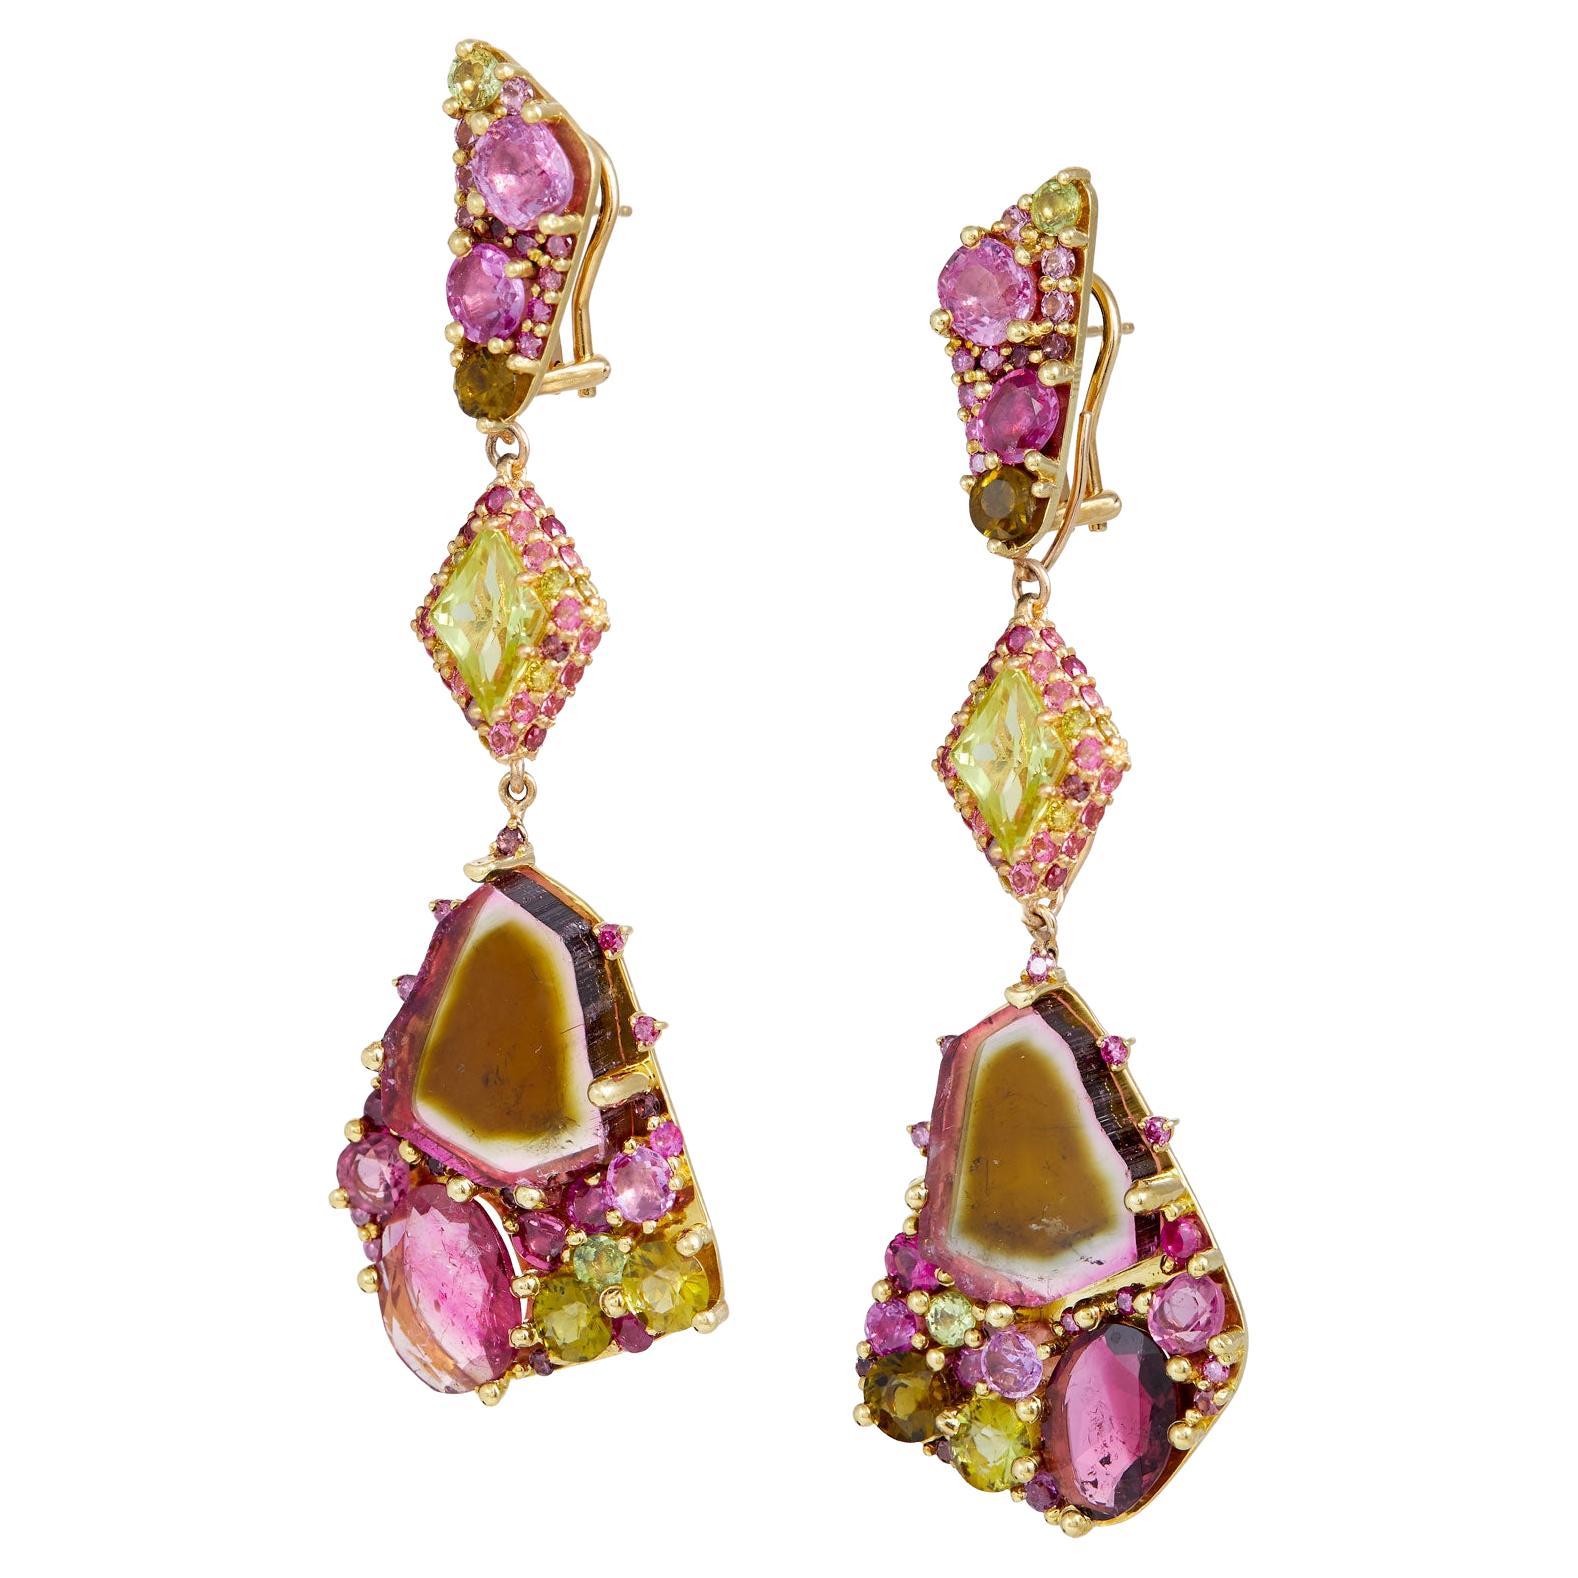 Honeydew jeweled adjustable earrings in 18k gold designed with adjustable lengths these drop style multiple length earrings are decorated with hpht pink diamonds 1.0 CTS, curated hand cut watermelon tourmalines 23.47 CTS, Peridots 2.43 CTS, pink